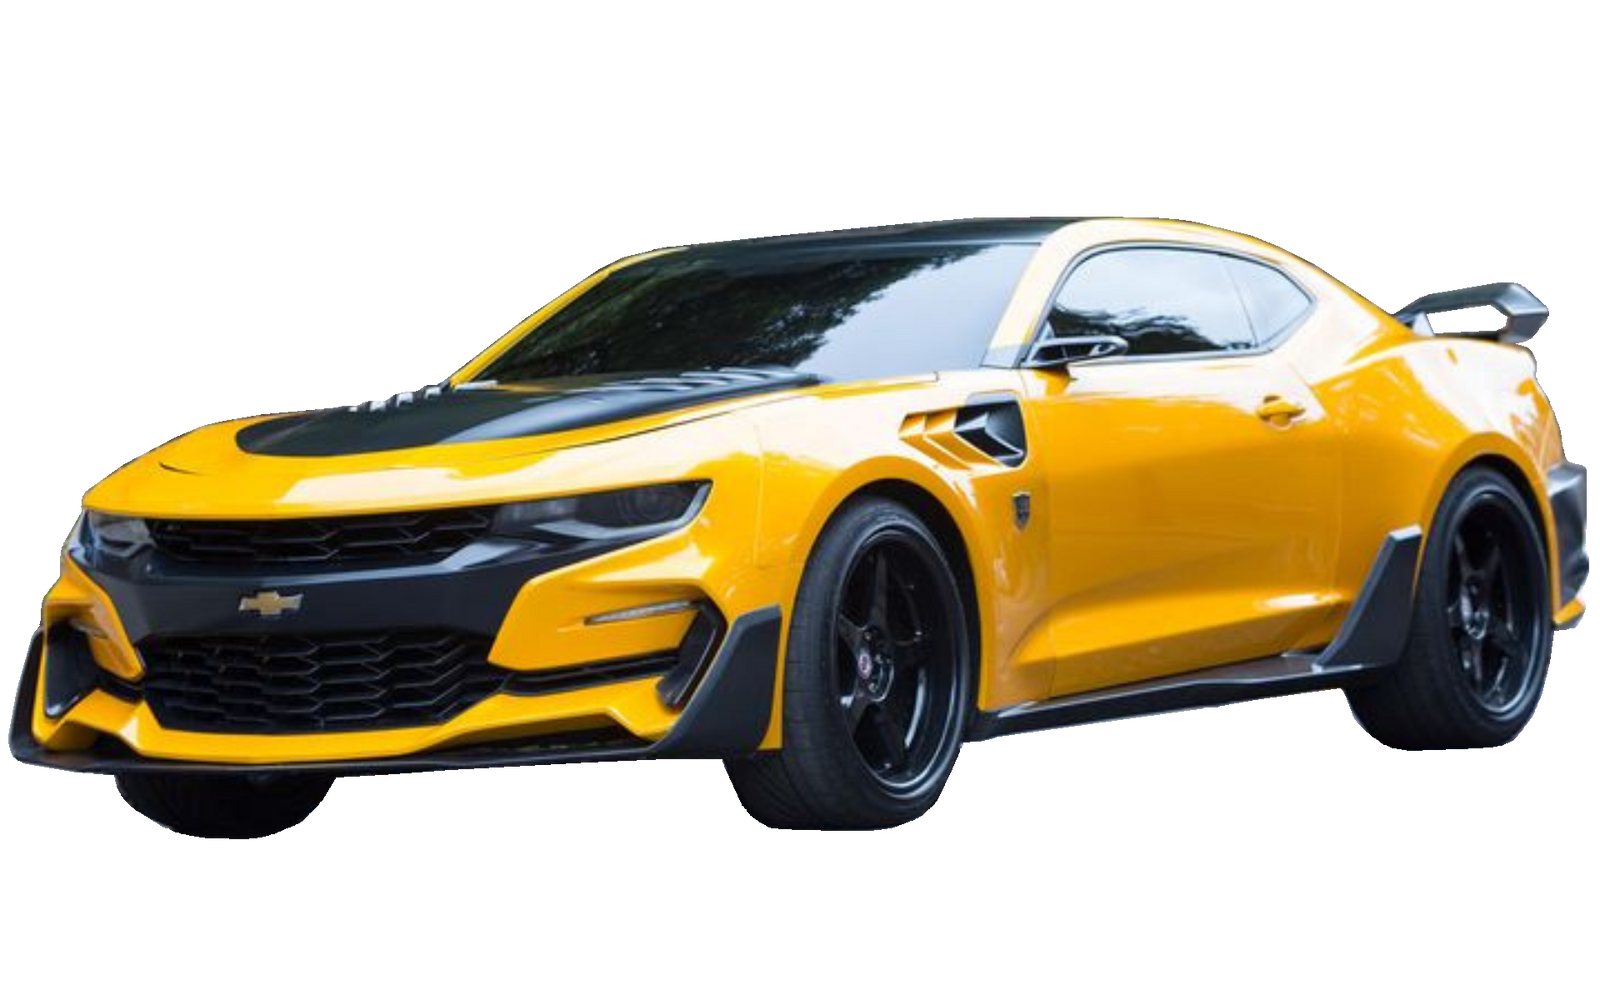 Bumblebee The Last Knight Camaro #2 by DipperBronyPines98 on DeviantArt